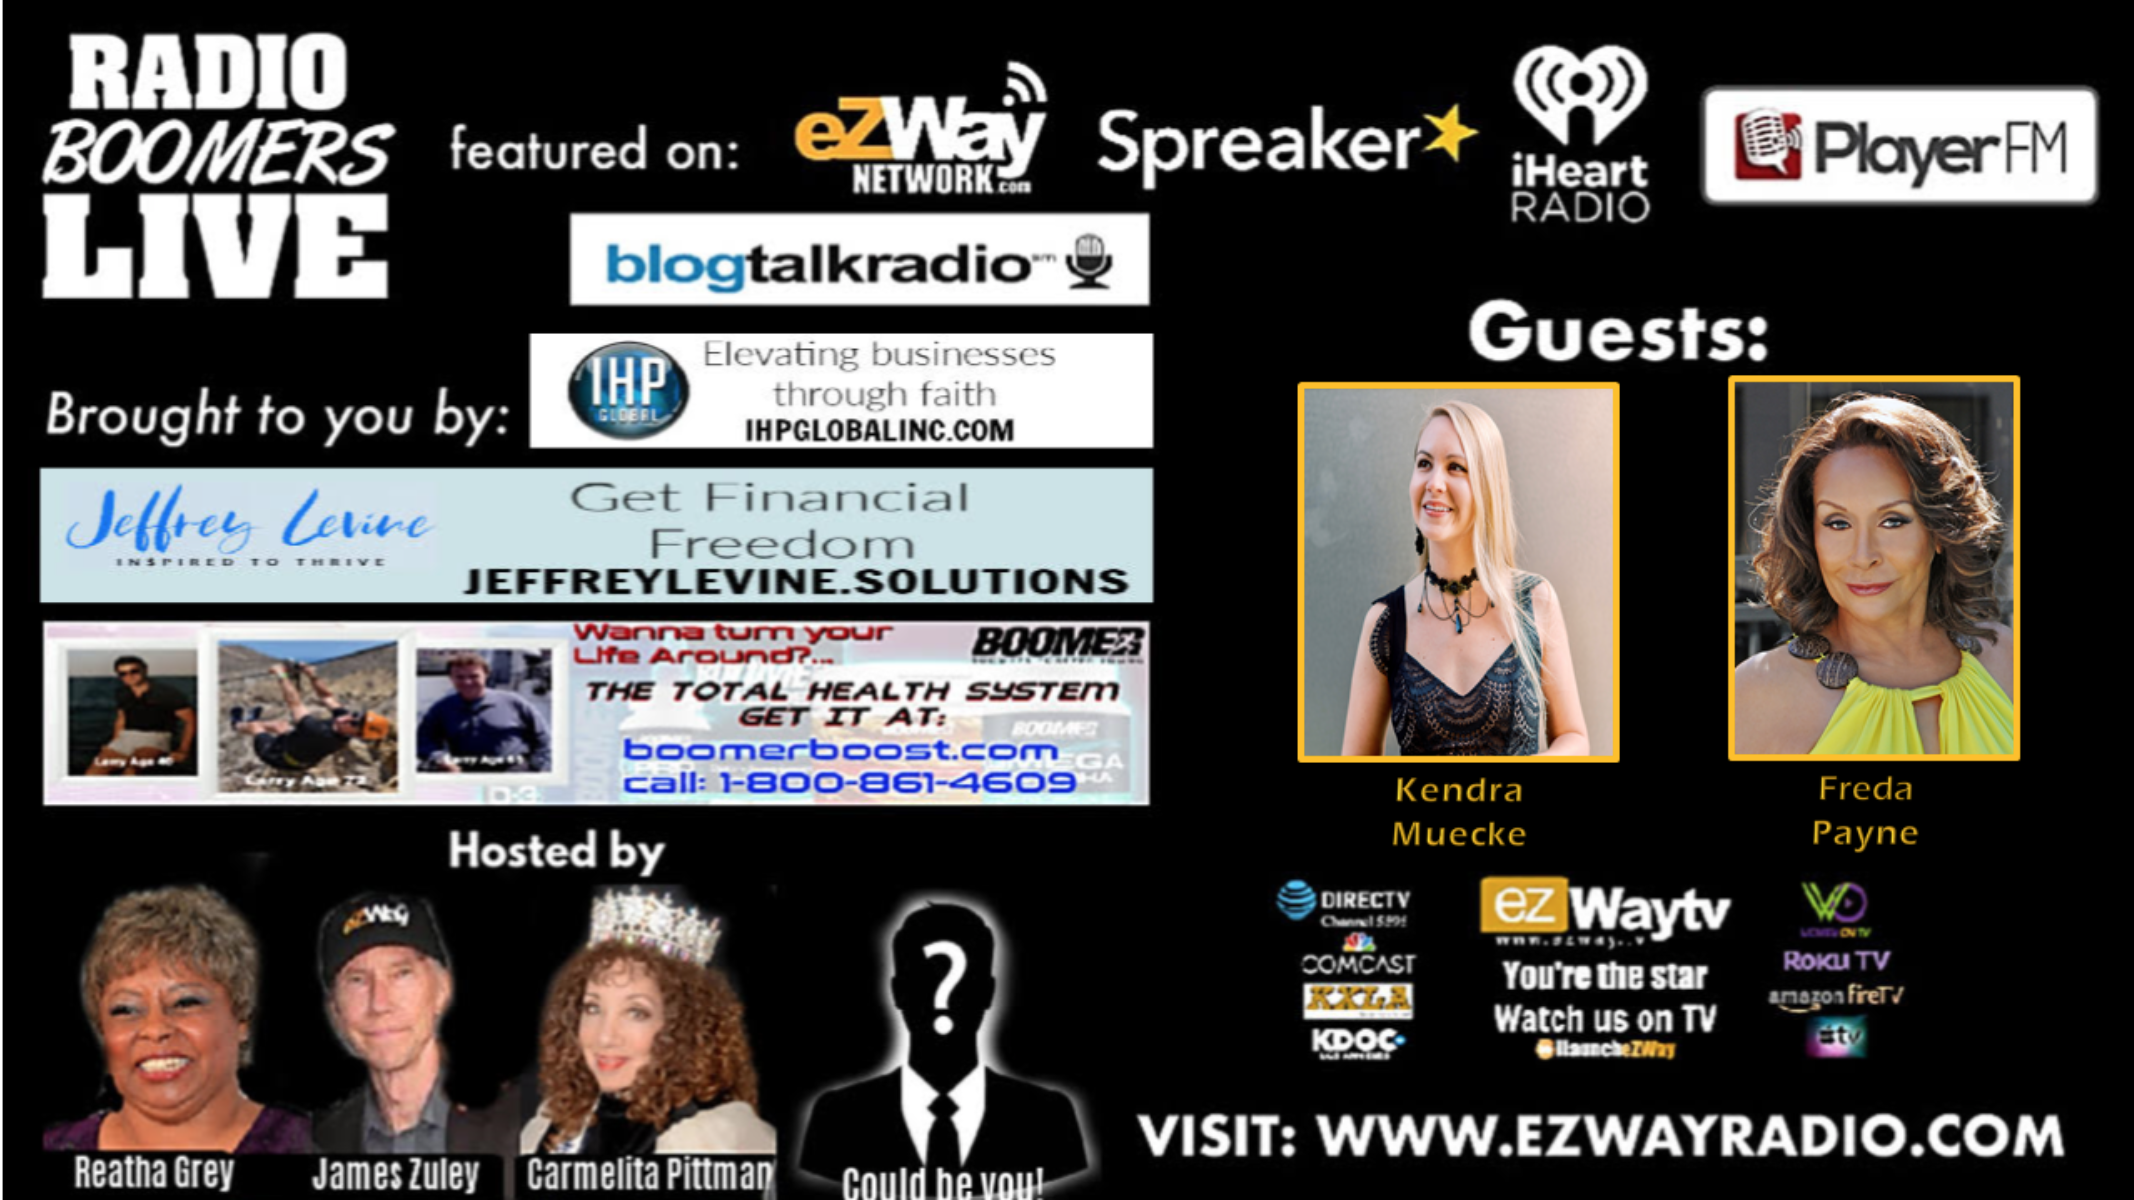 eZWay Radio Podcast Show Featuring Kendra Muecke